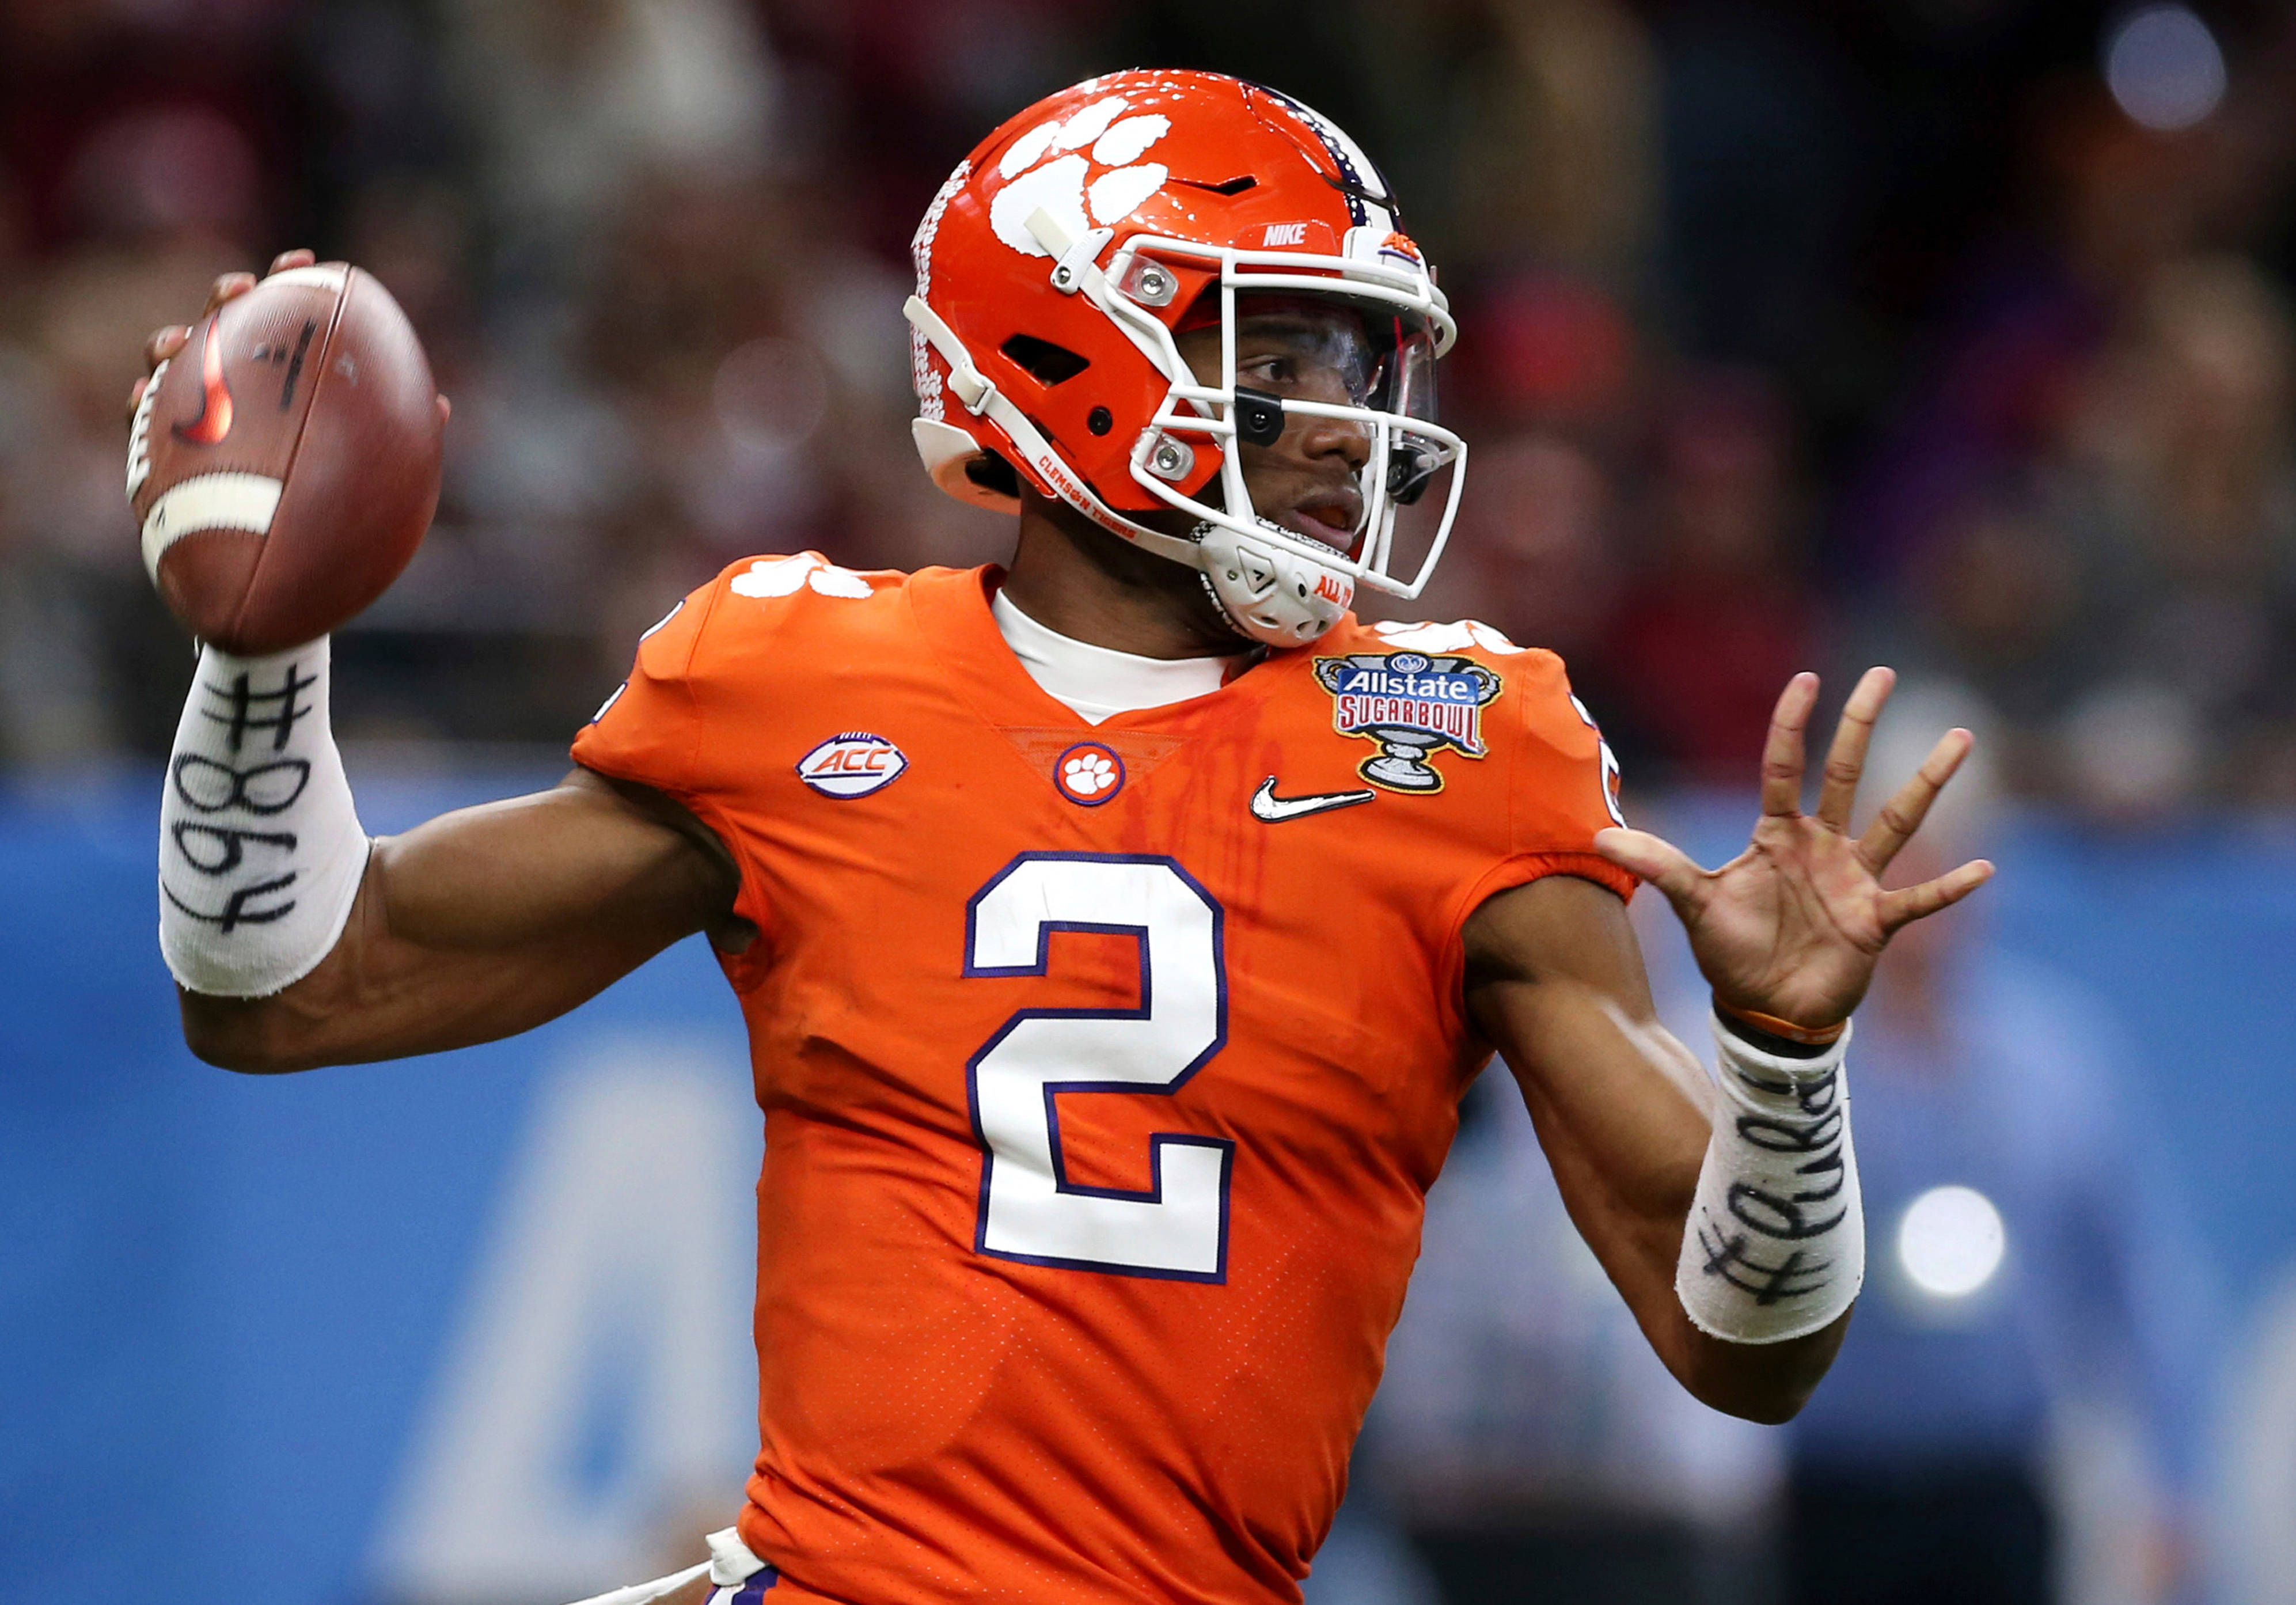 Fans for No. 2 Clemson eager to see QB backup Lawrence